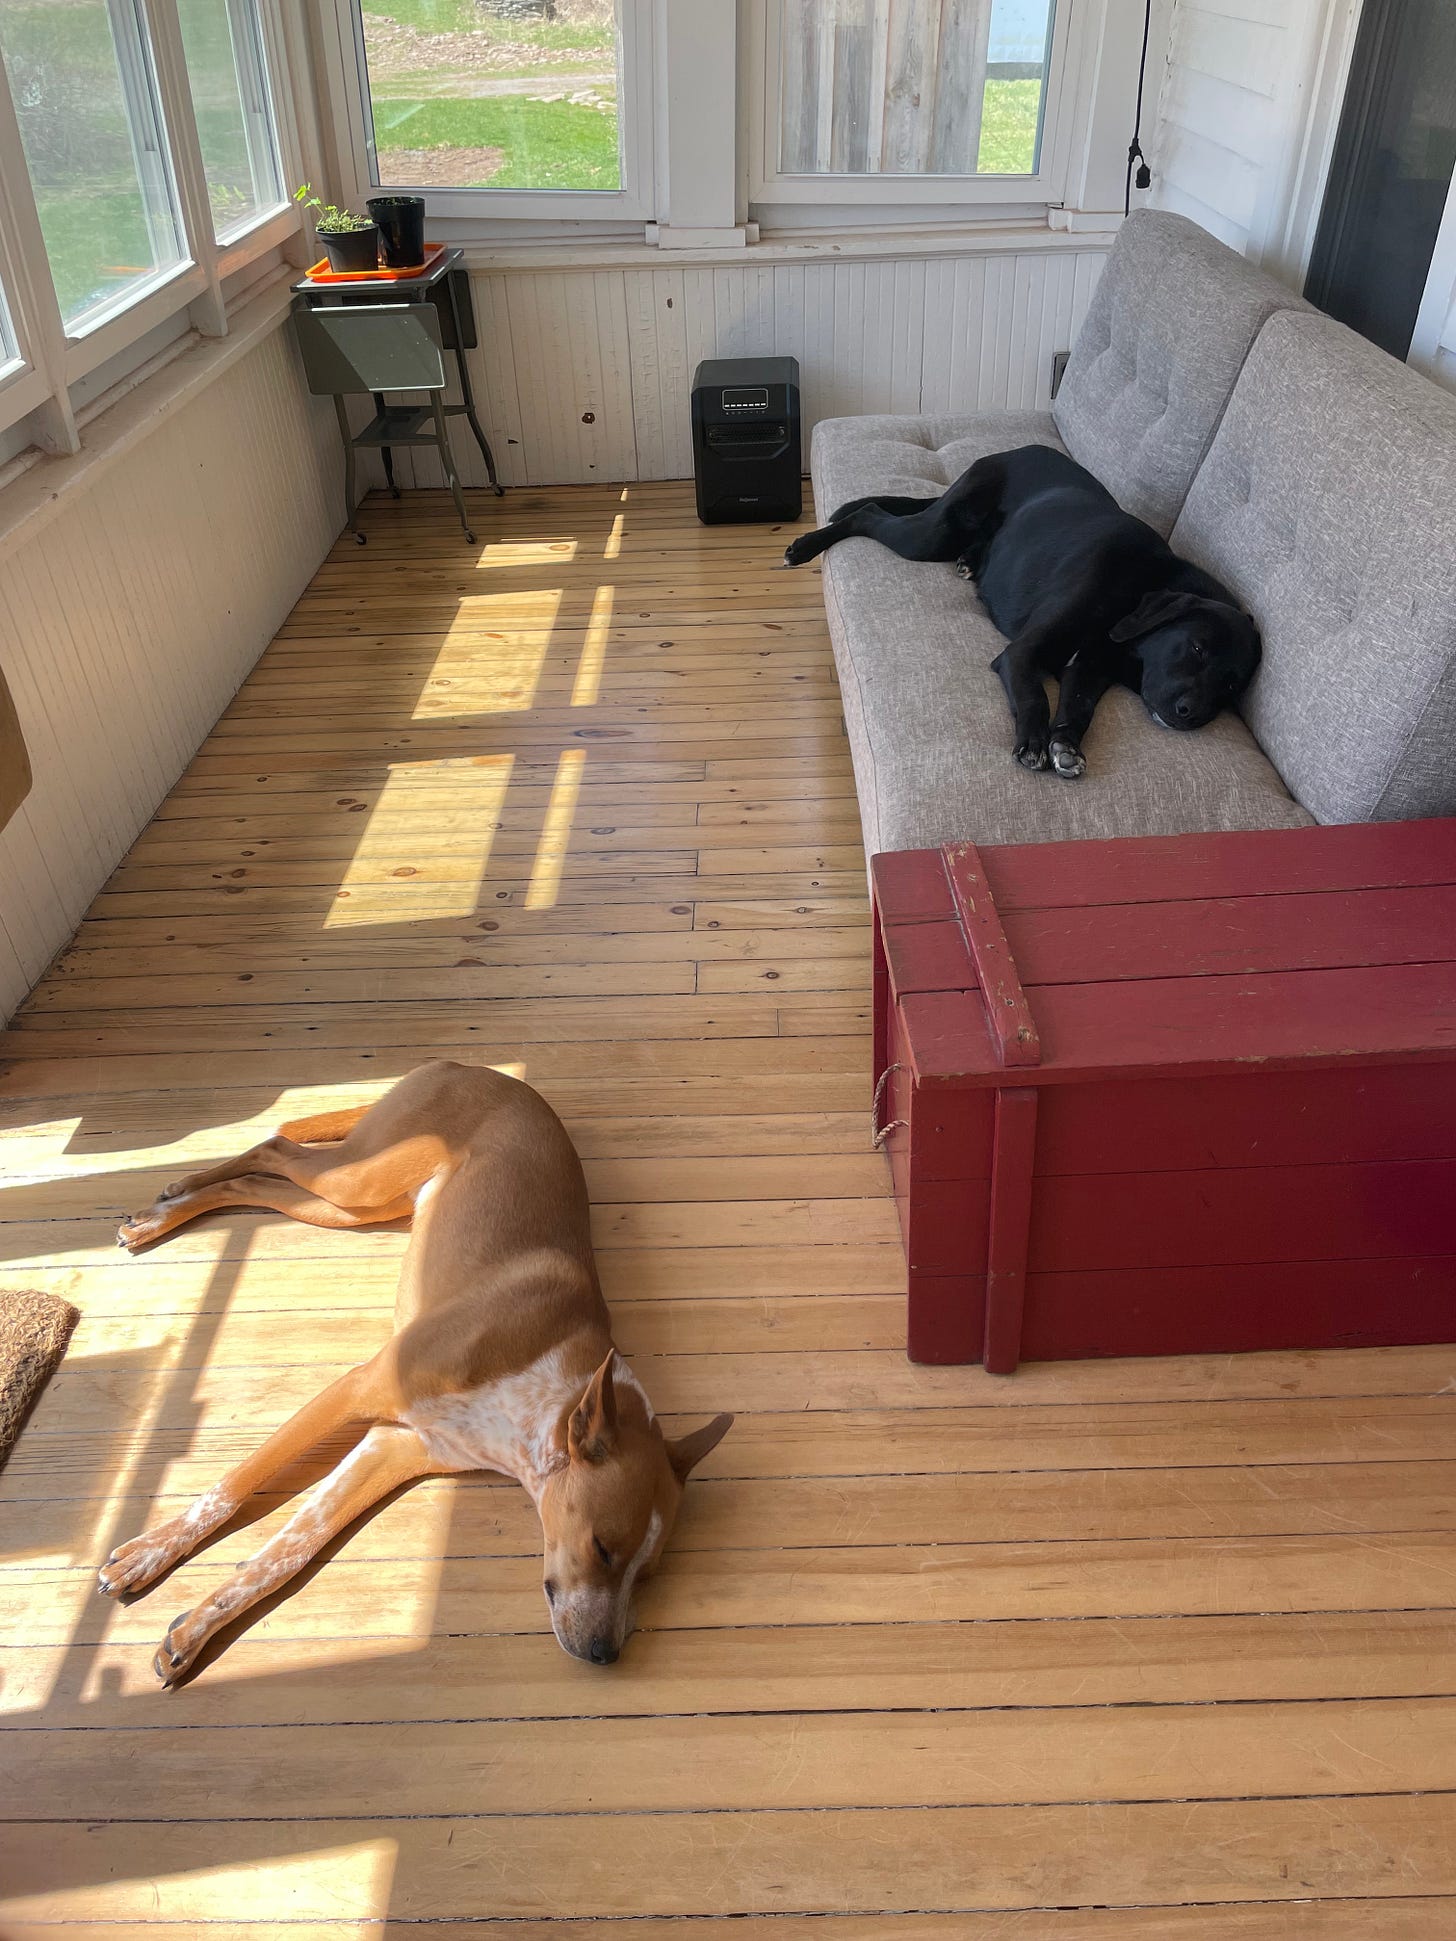 Rufus the puppy alongside Saturn the big dog asleep on the porch, seedlings in back